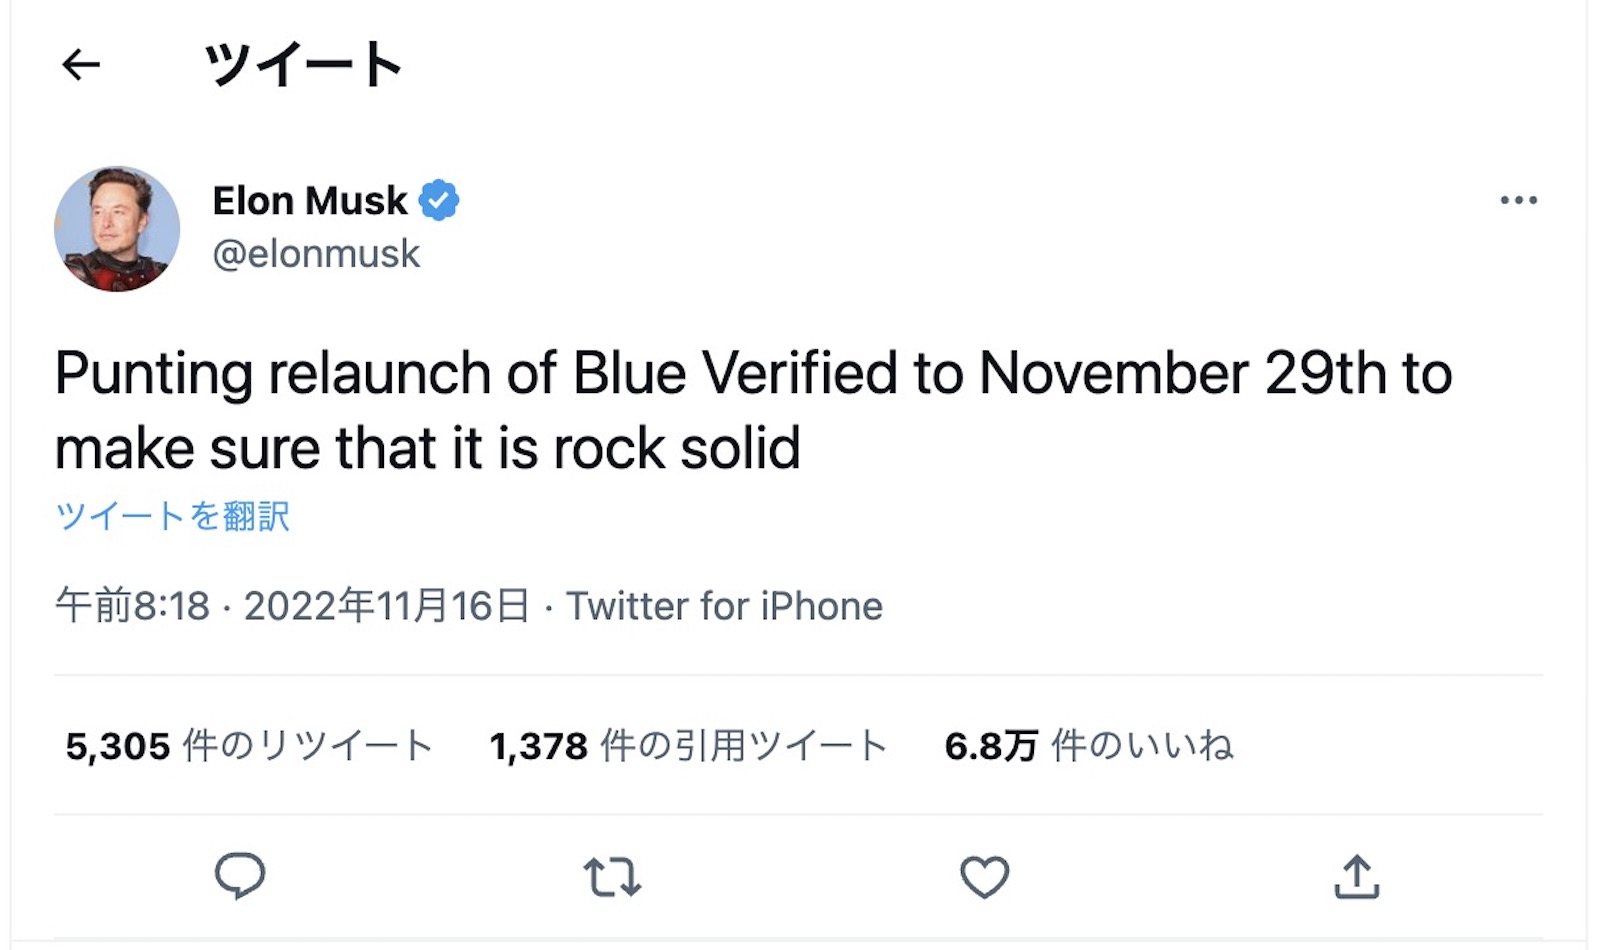 Elon Musk Aims to relaunch blue verified on nov29th